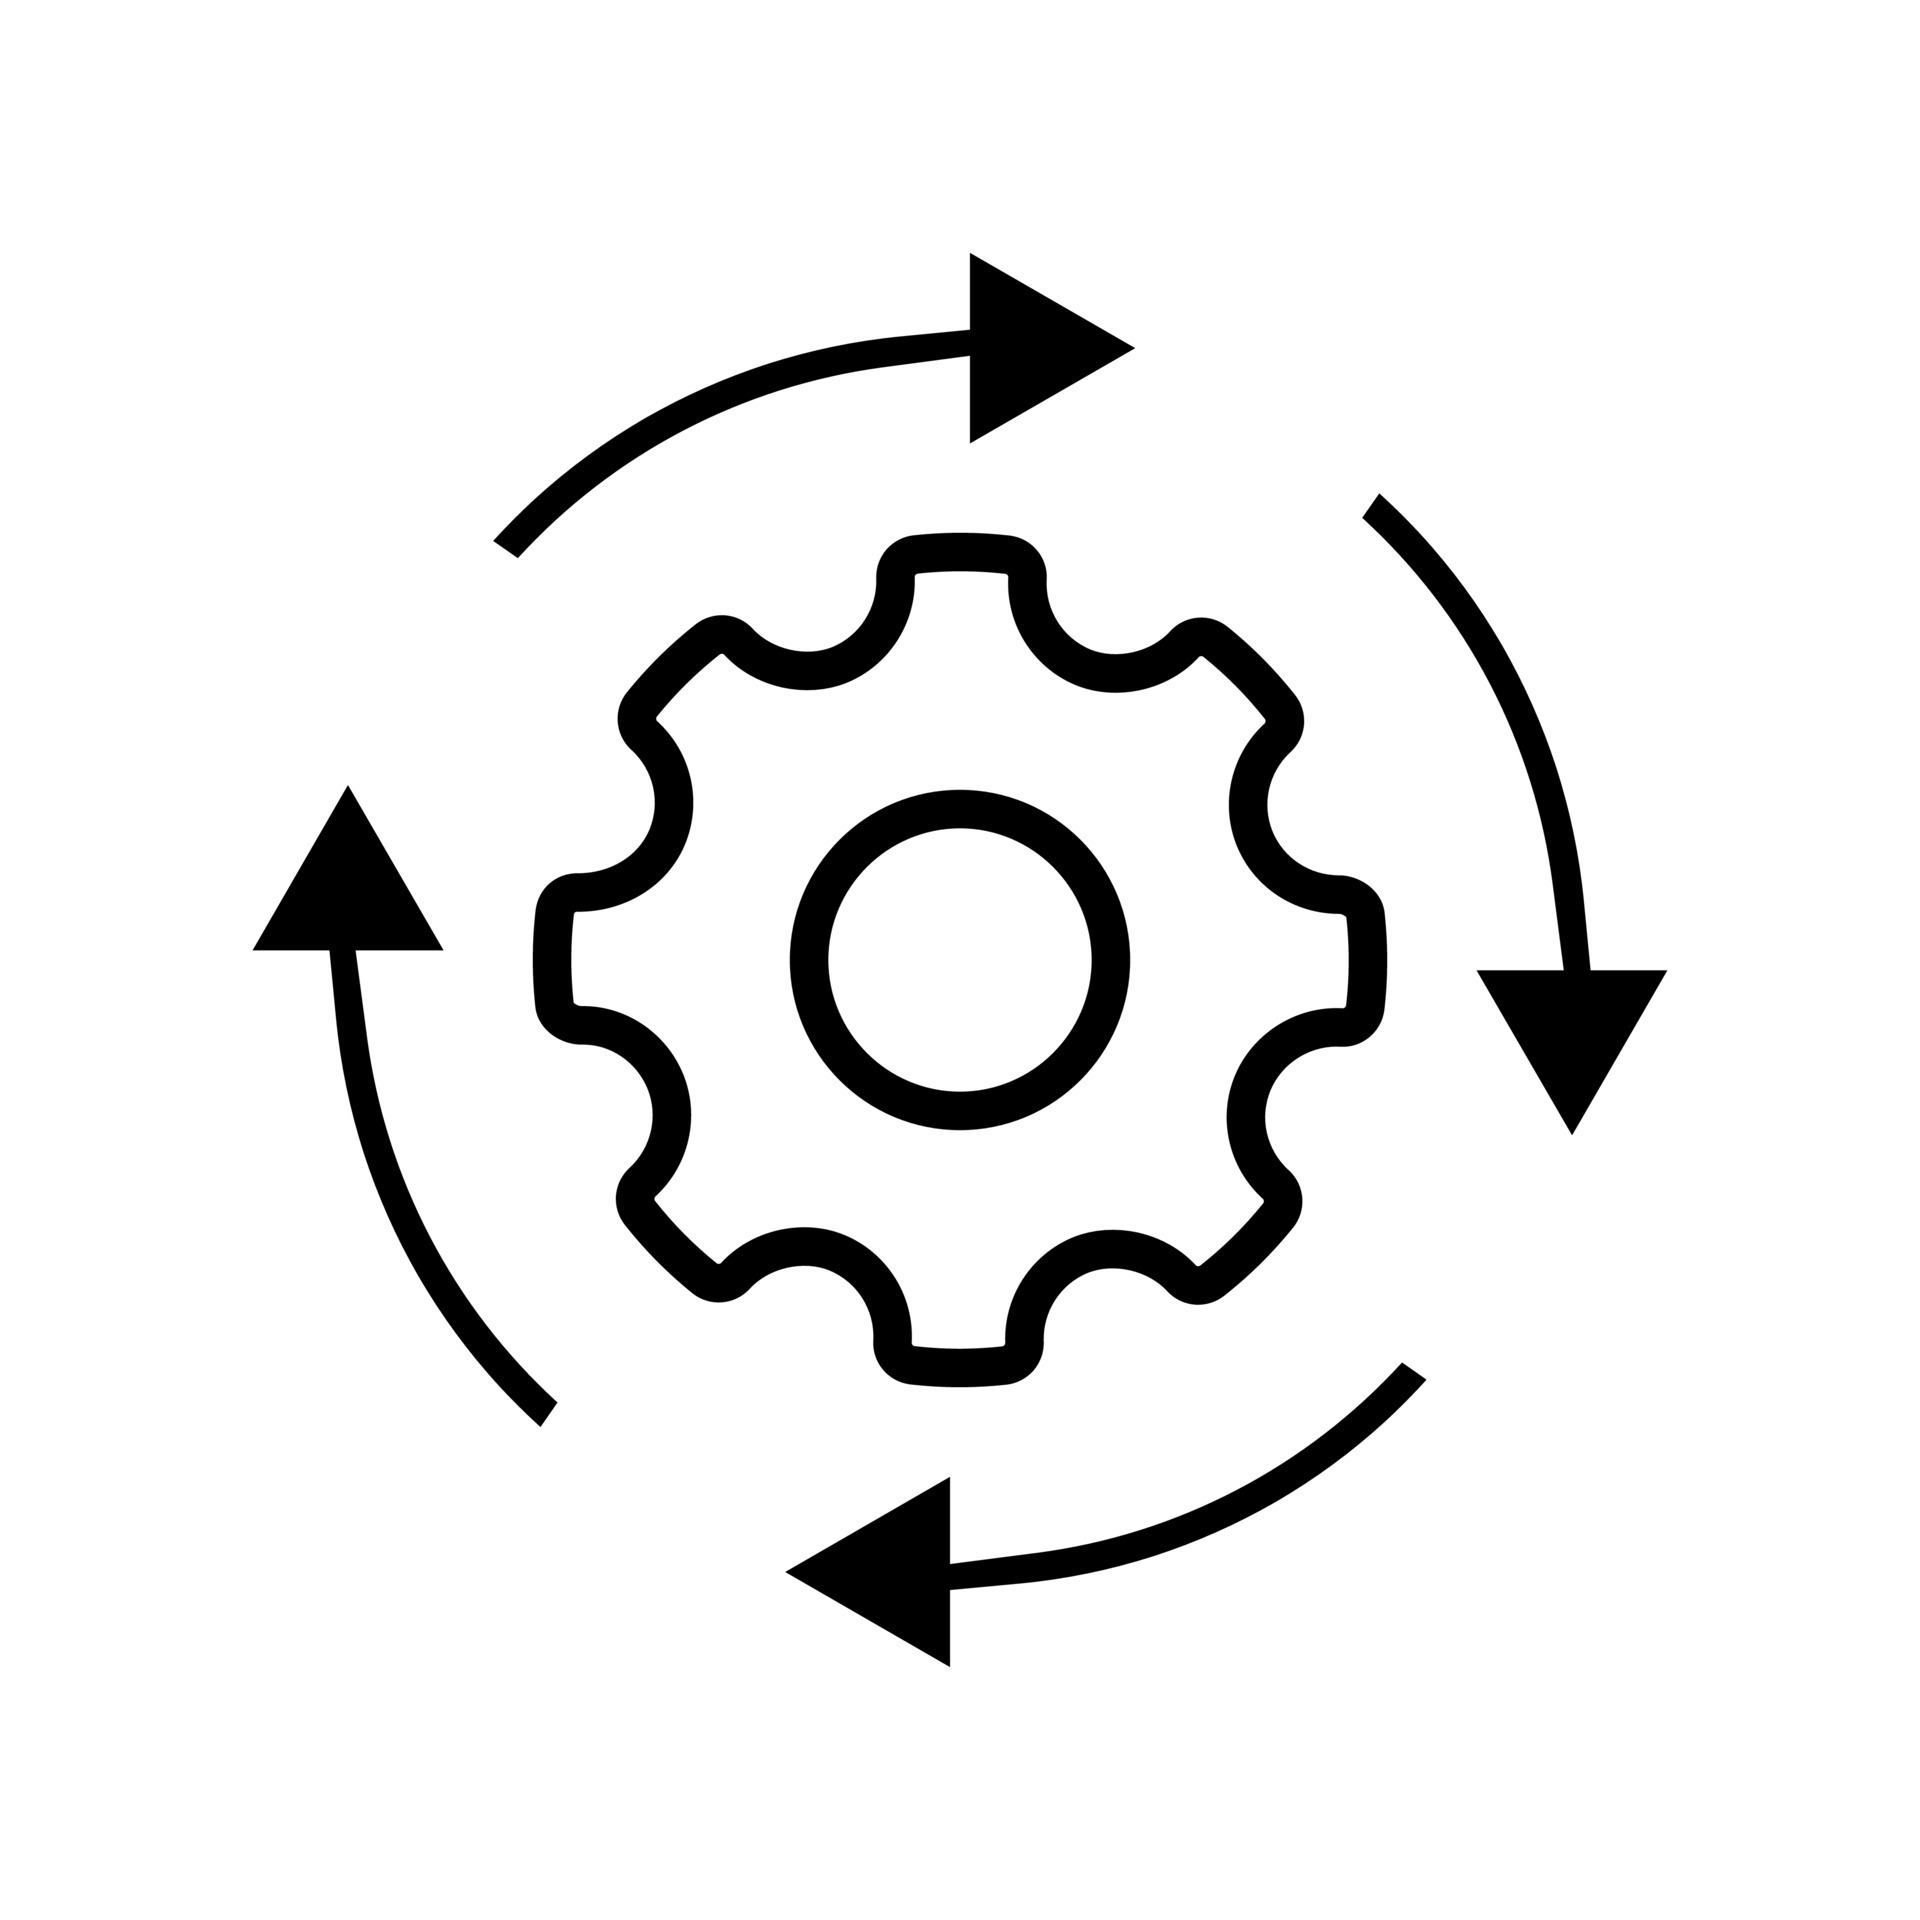 Vector gear reload icon with arrow. Workflow process icon isolated